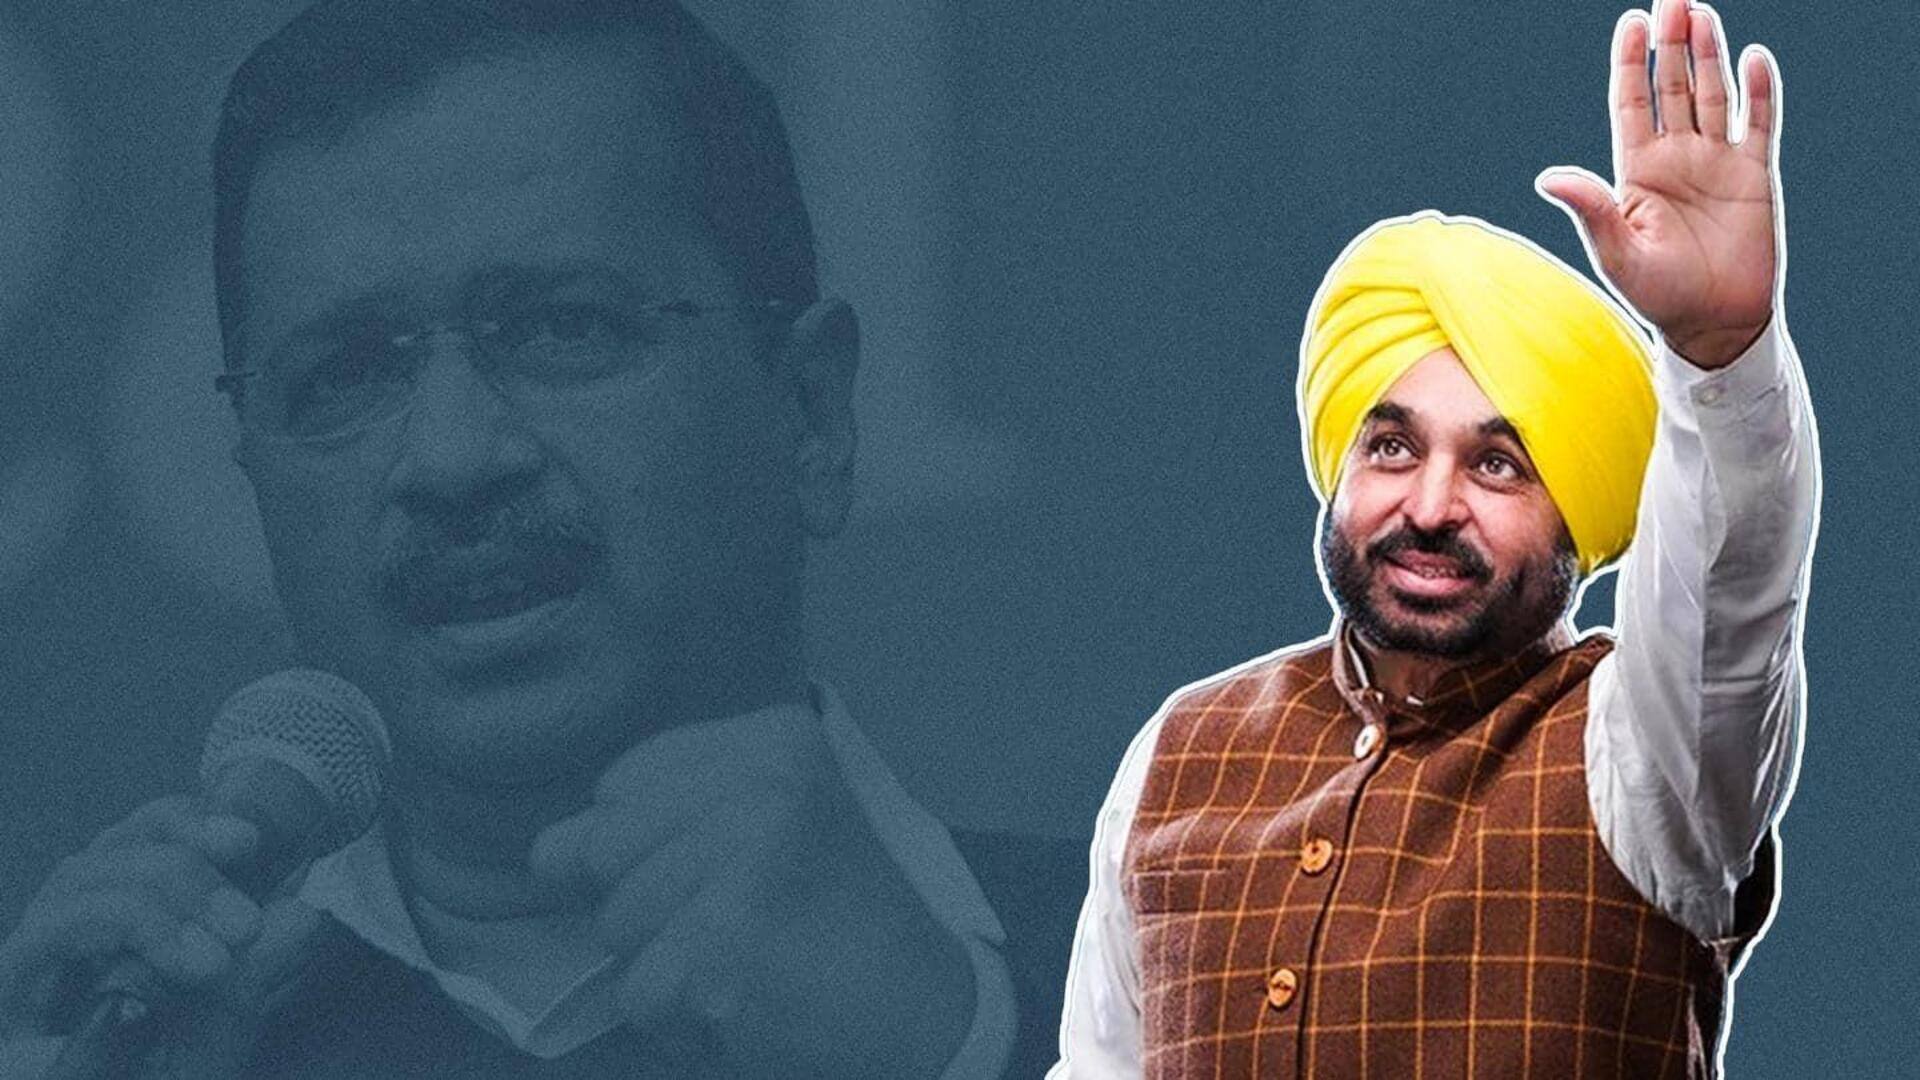 After Delhi, will Punjab's excise policy be under scanner?